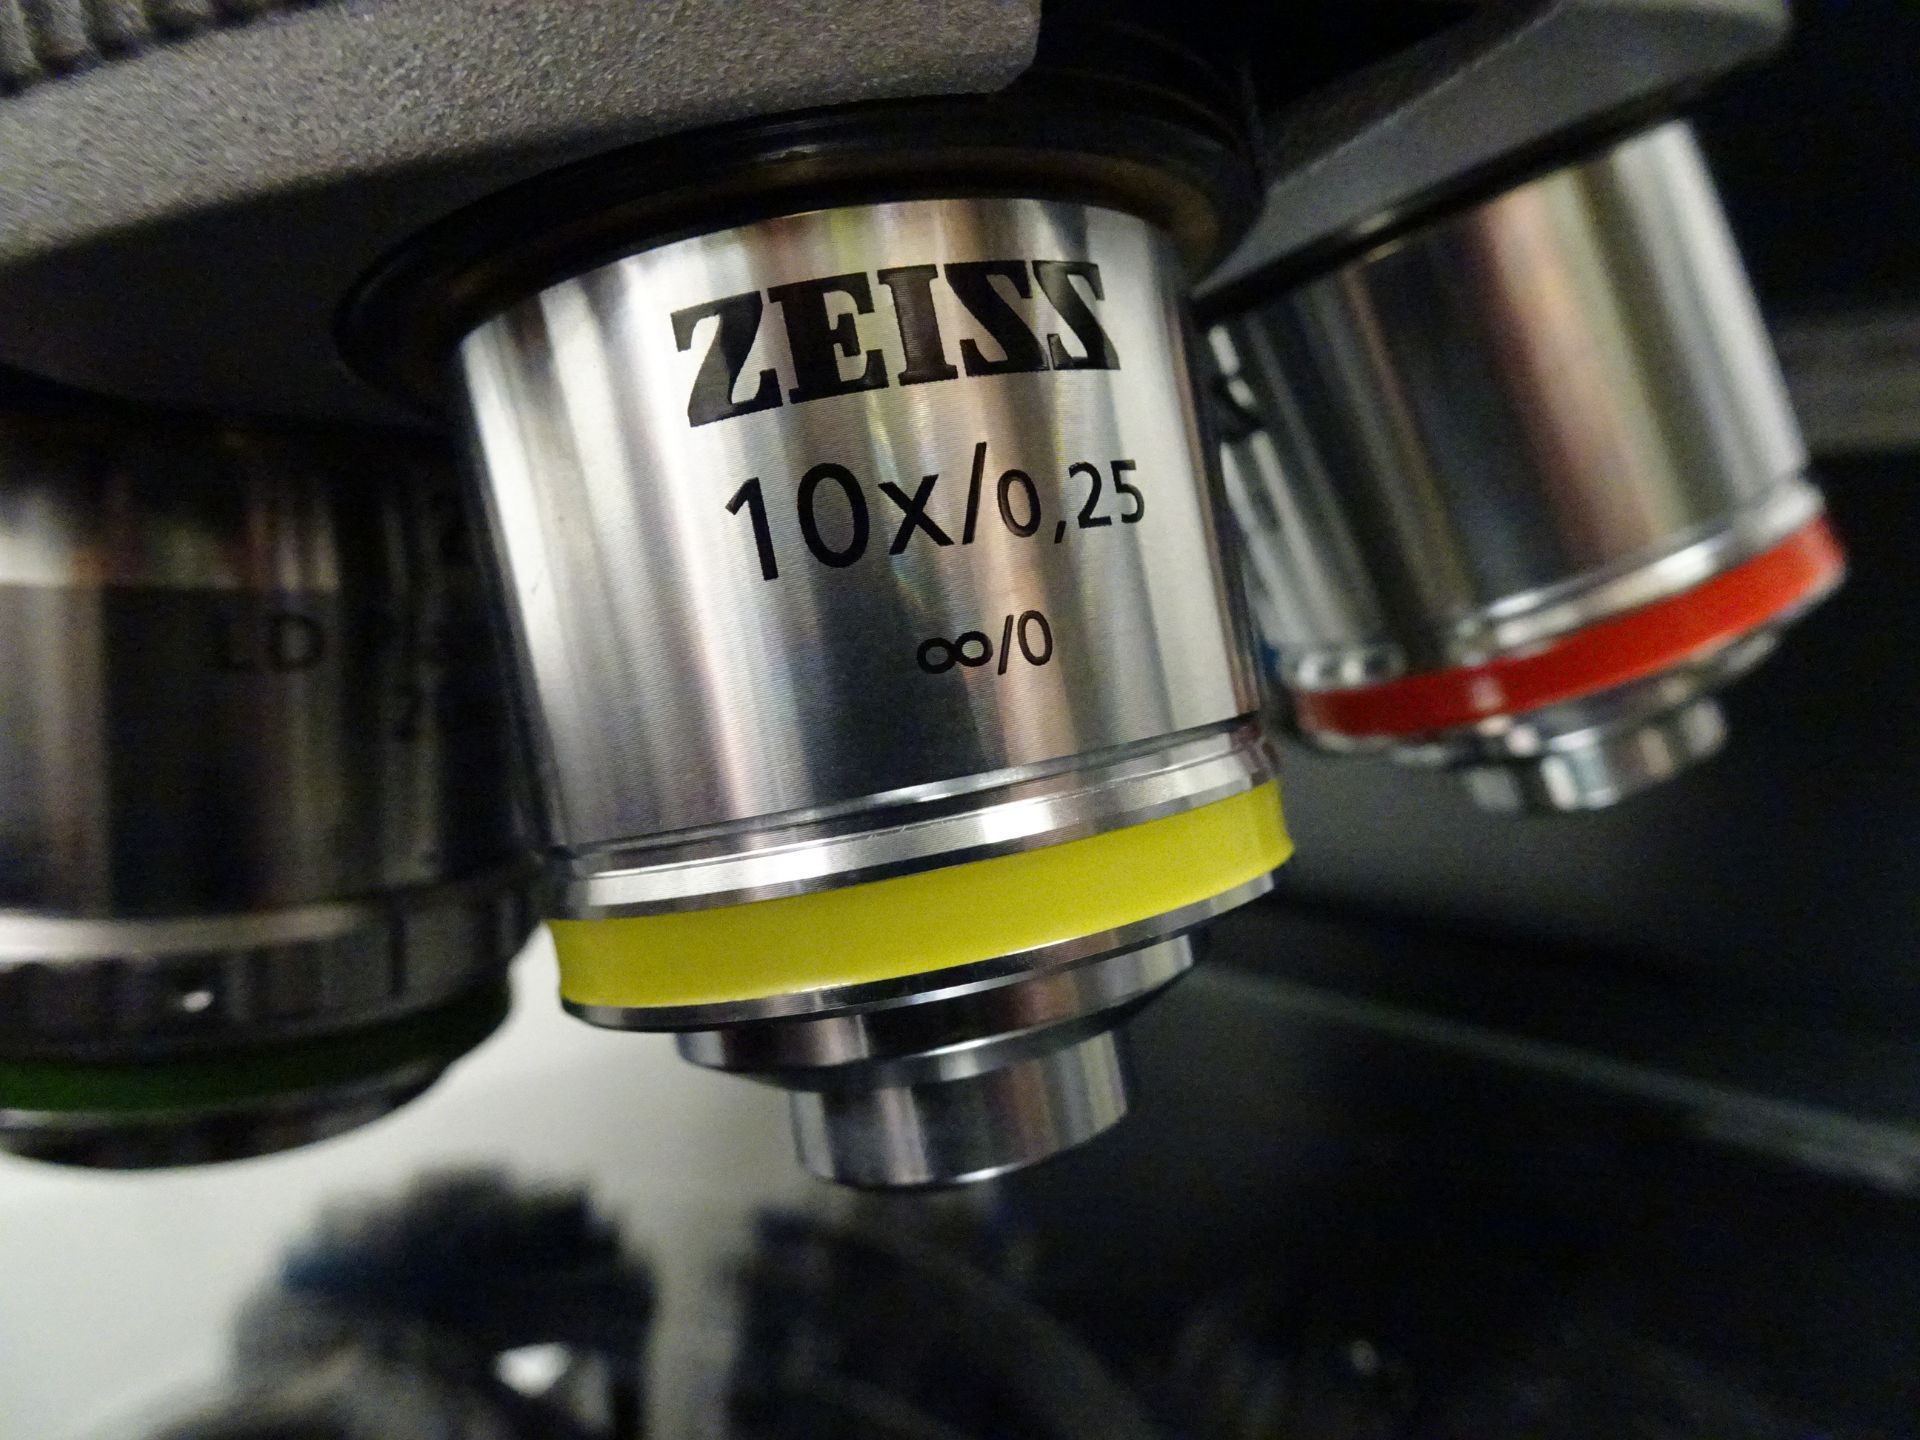 Zeiss Axio Imager.M2 Microscope With AxioCam MRM Camers With 60N-C 1" Camera Adapter, (2) 1PL 10x/23 - Image 15 of 22